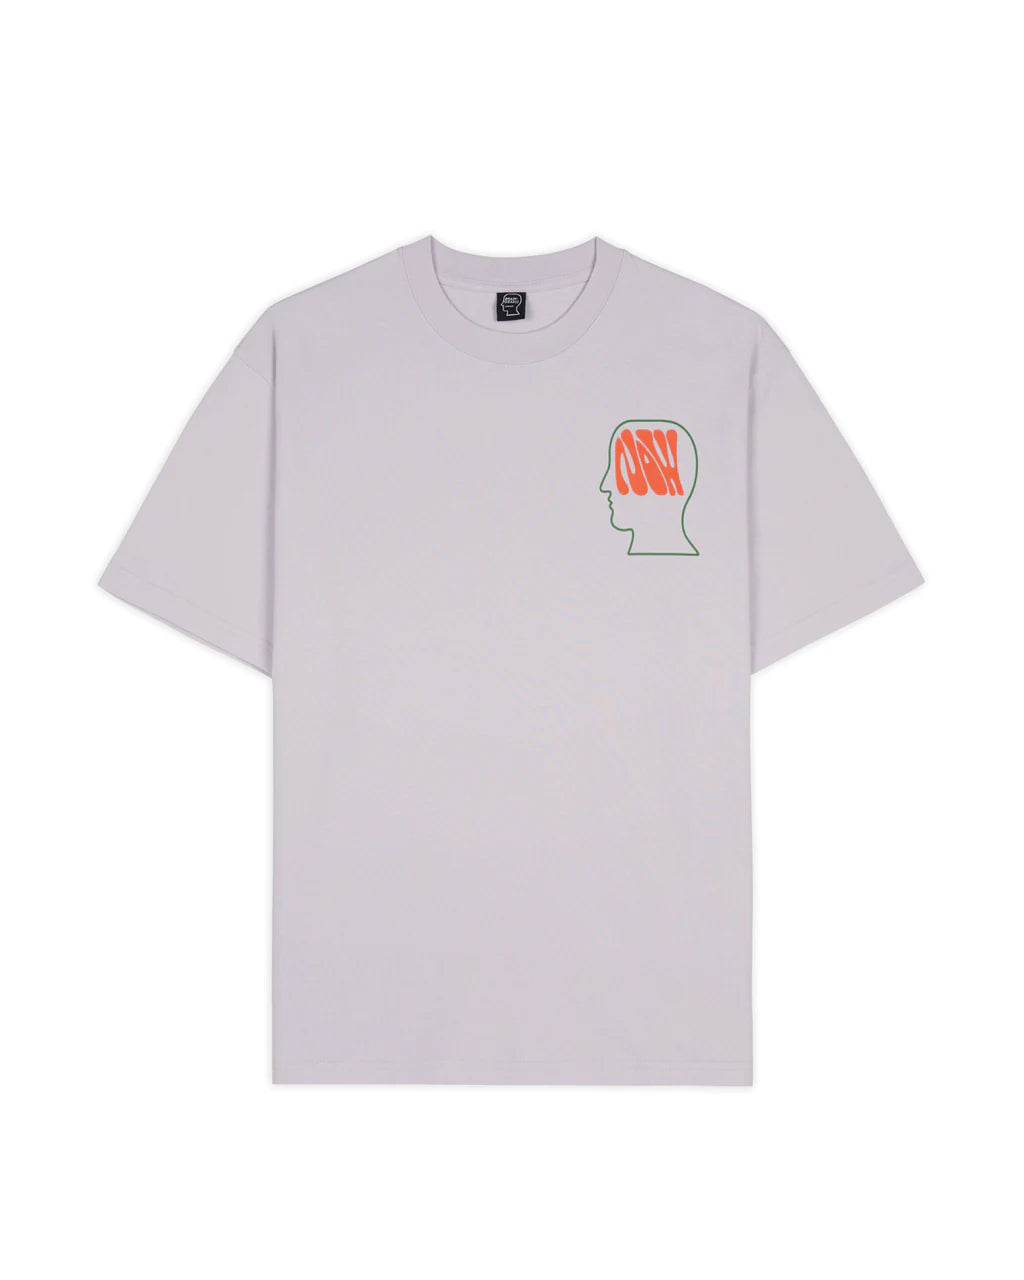 The Now Movement T-Shirt